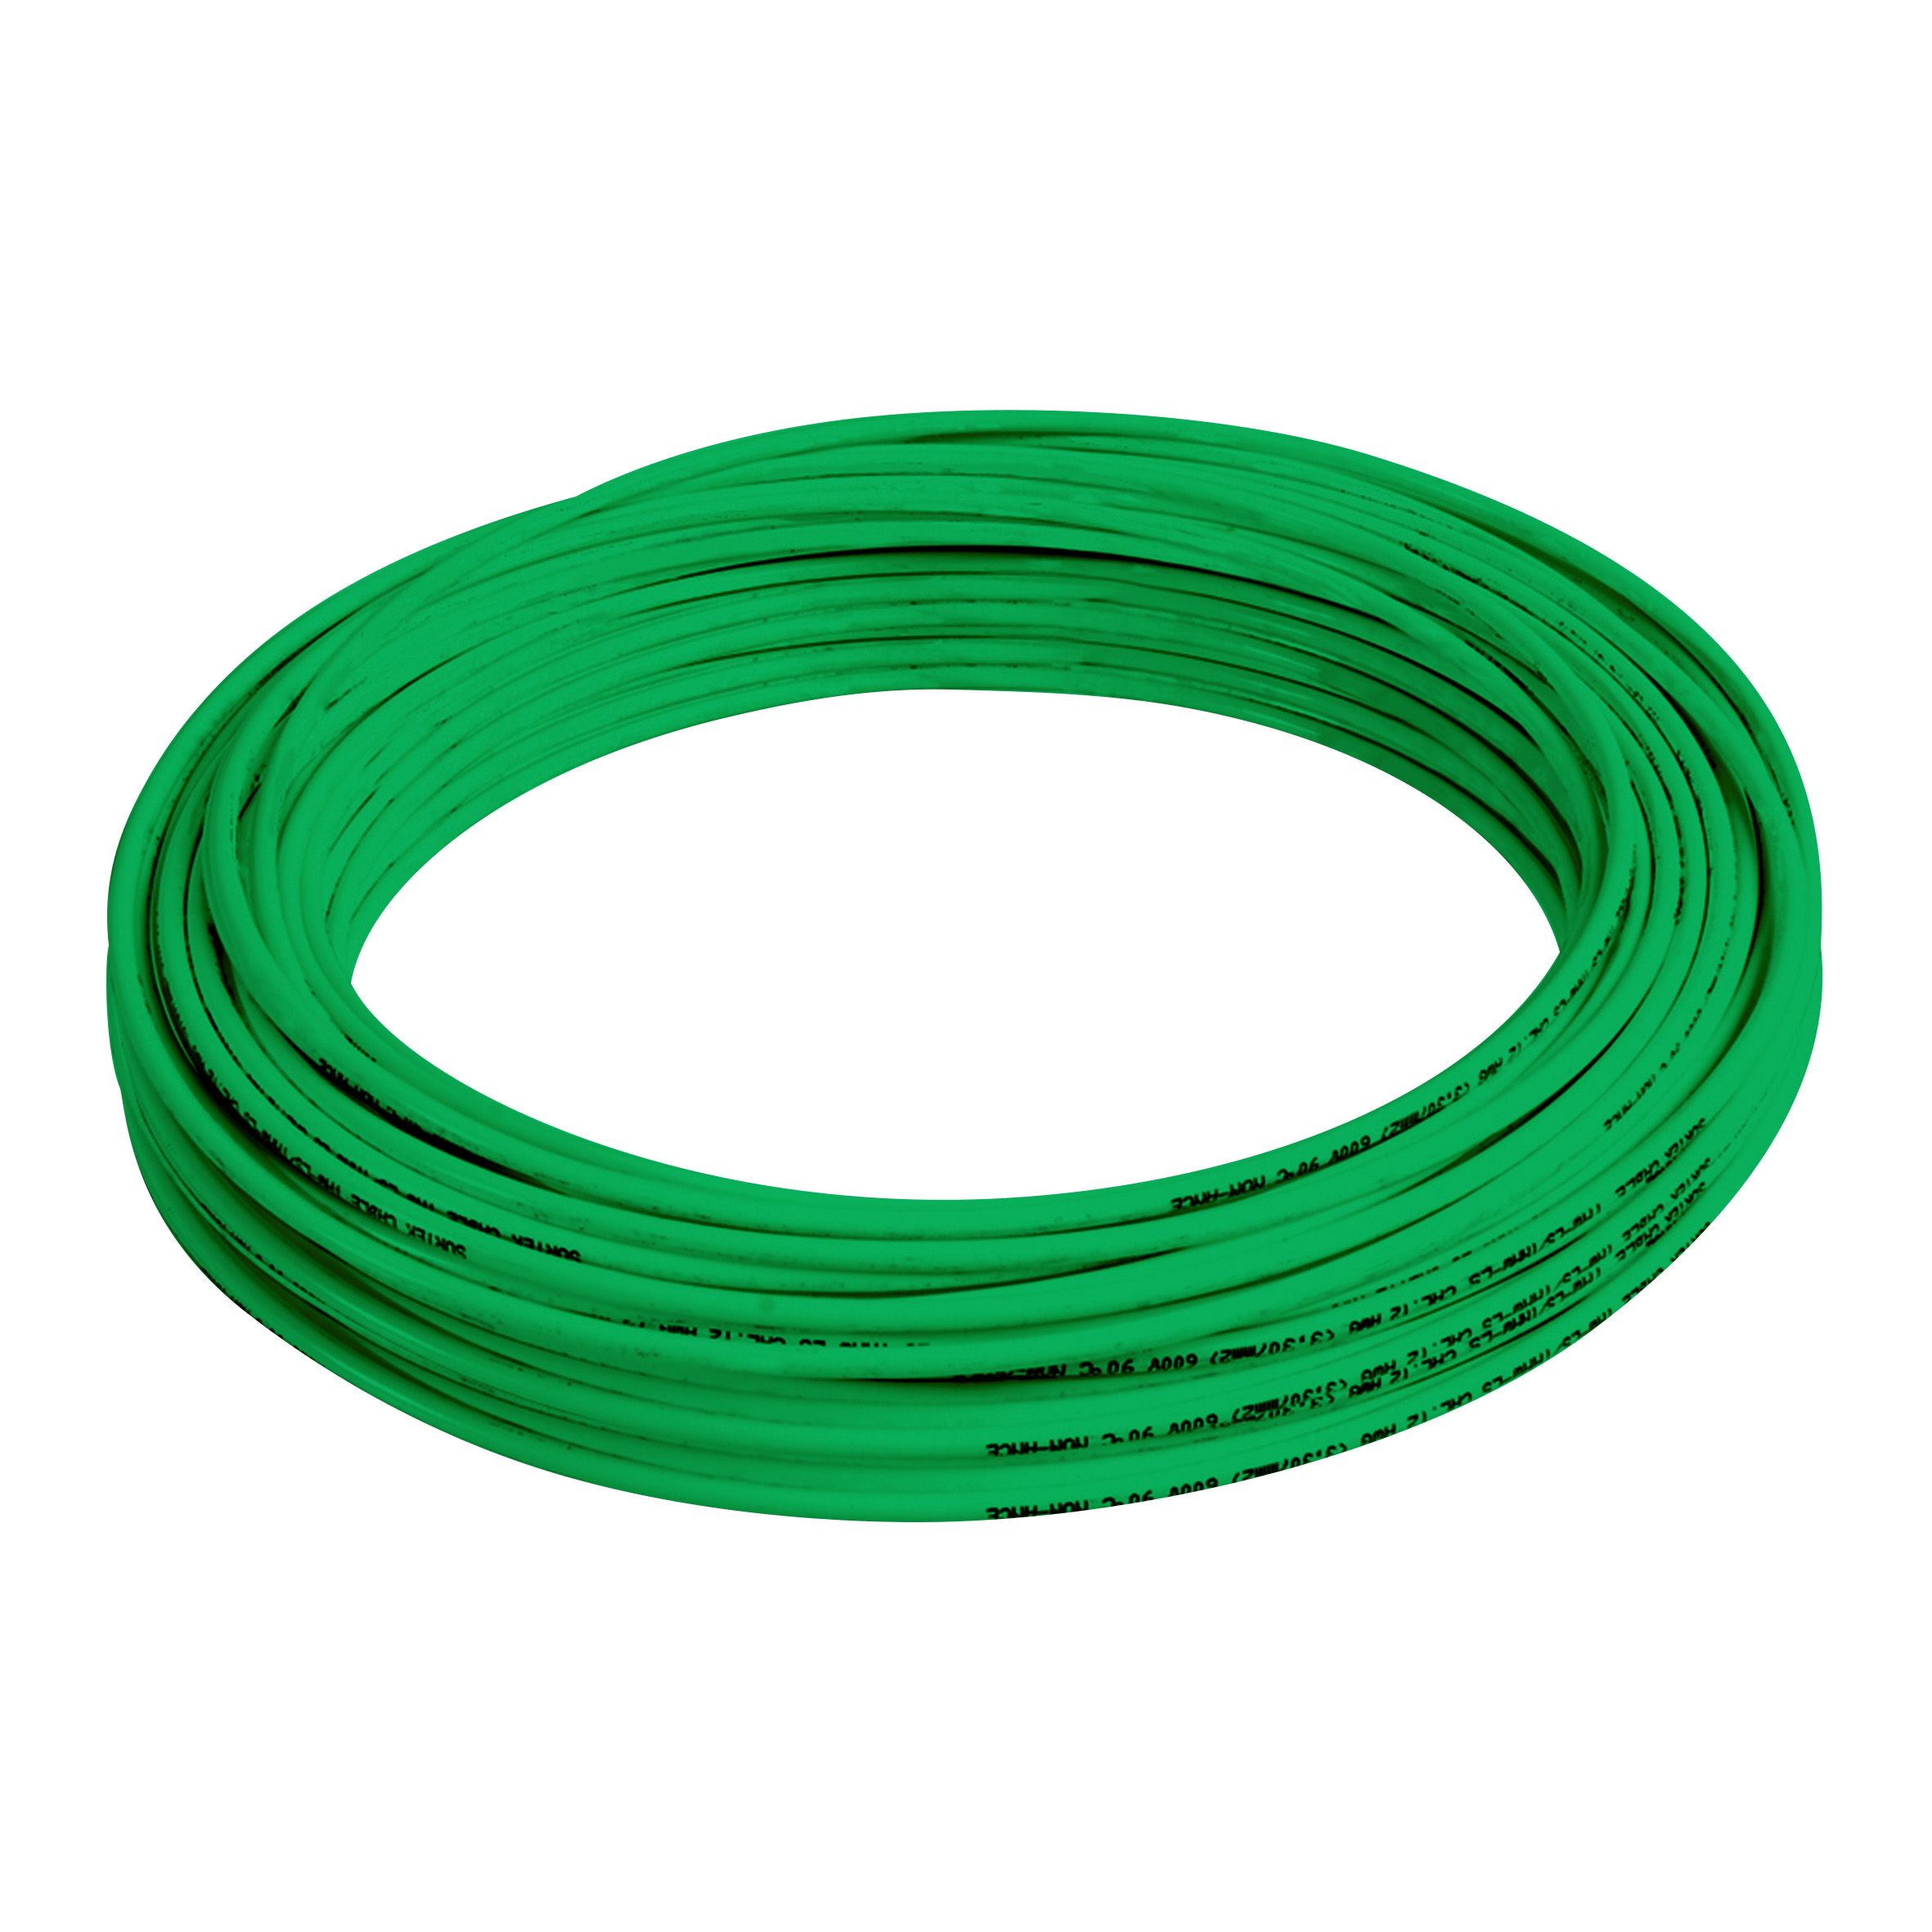 Cable eléctrico tipo THW-LS / THHW-LS Cal.12 100m verde - Ferrecompras 